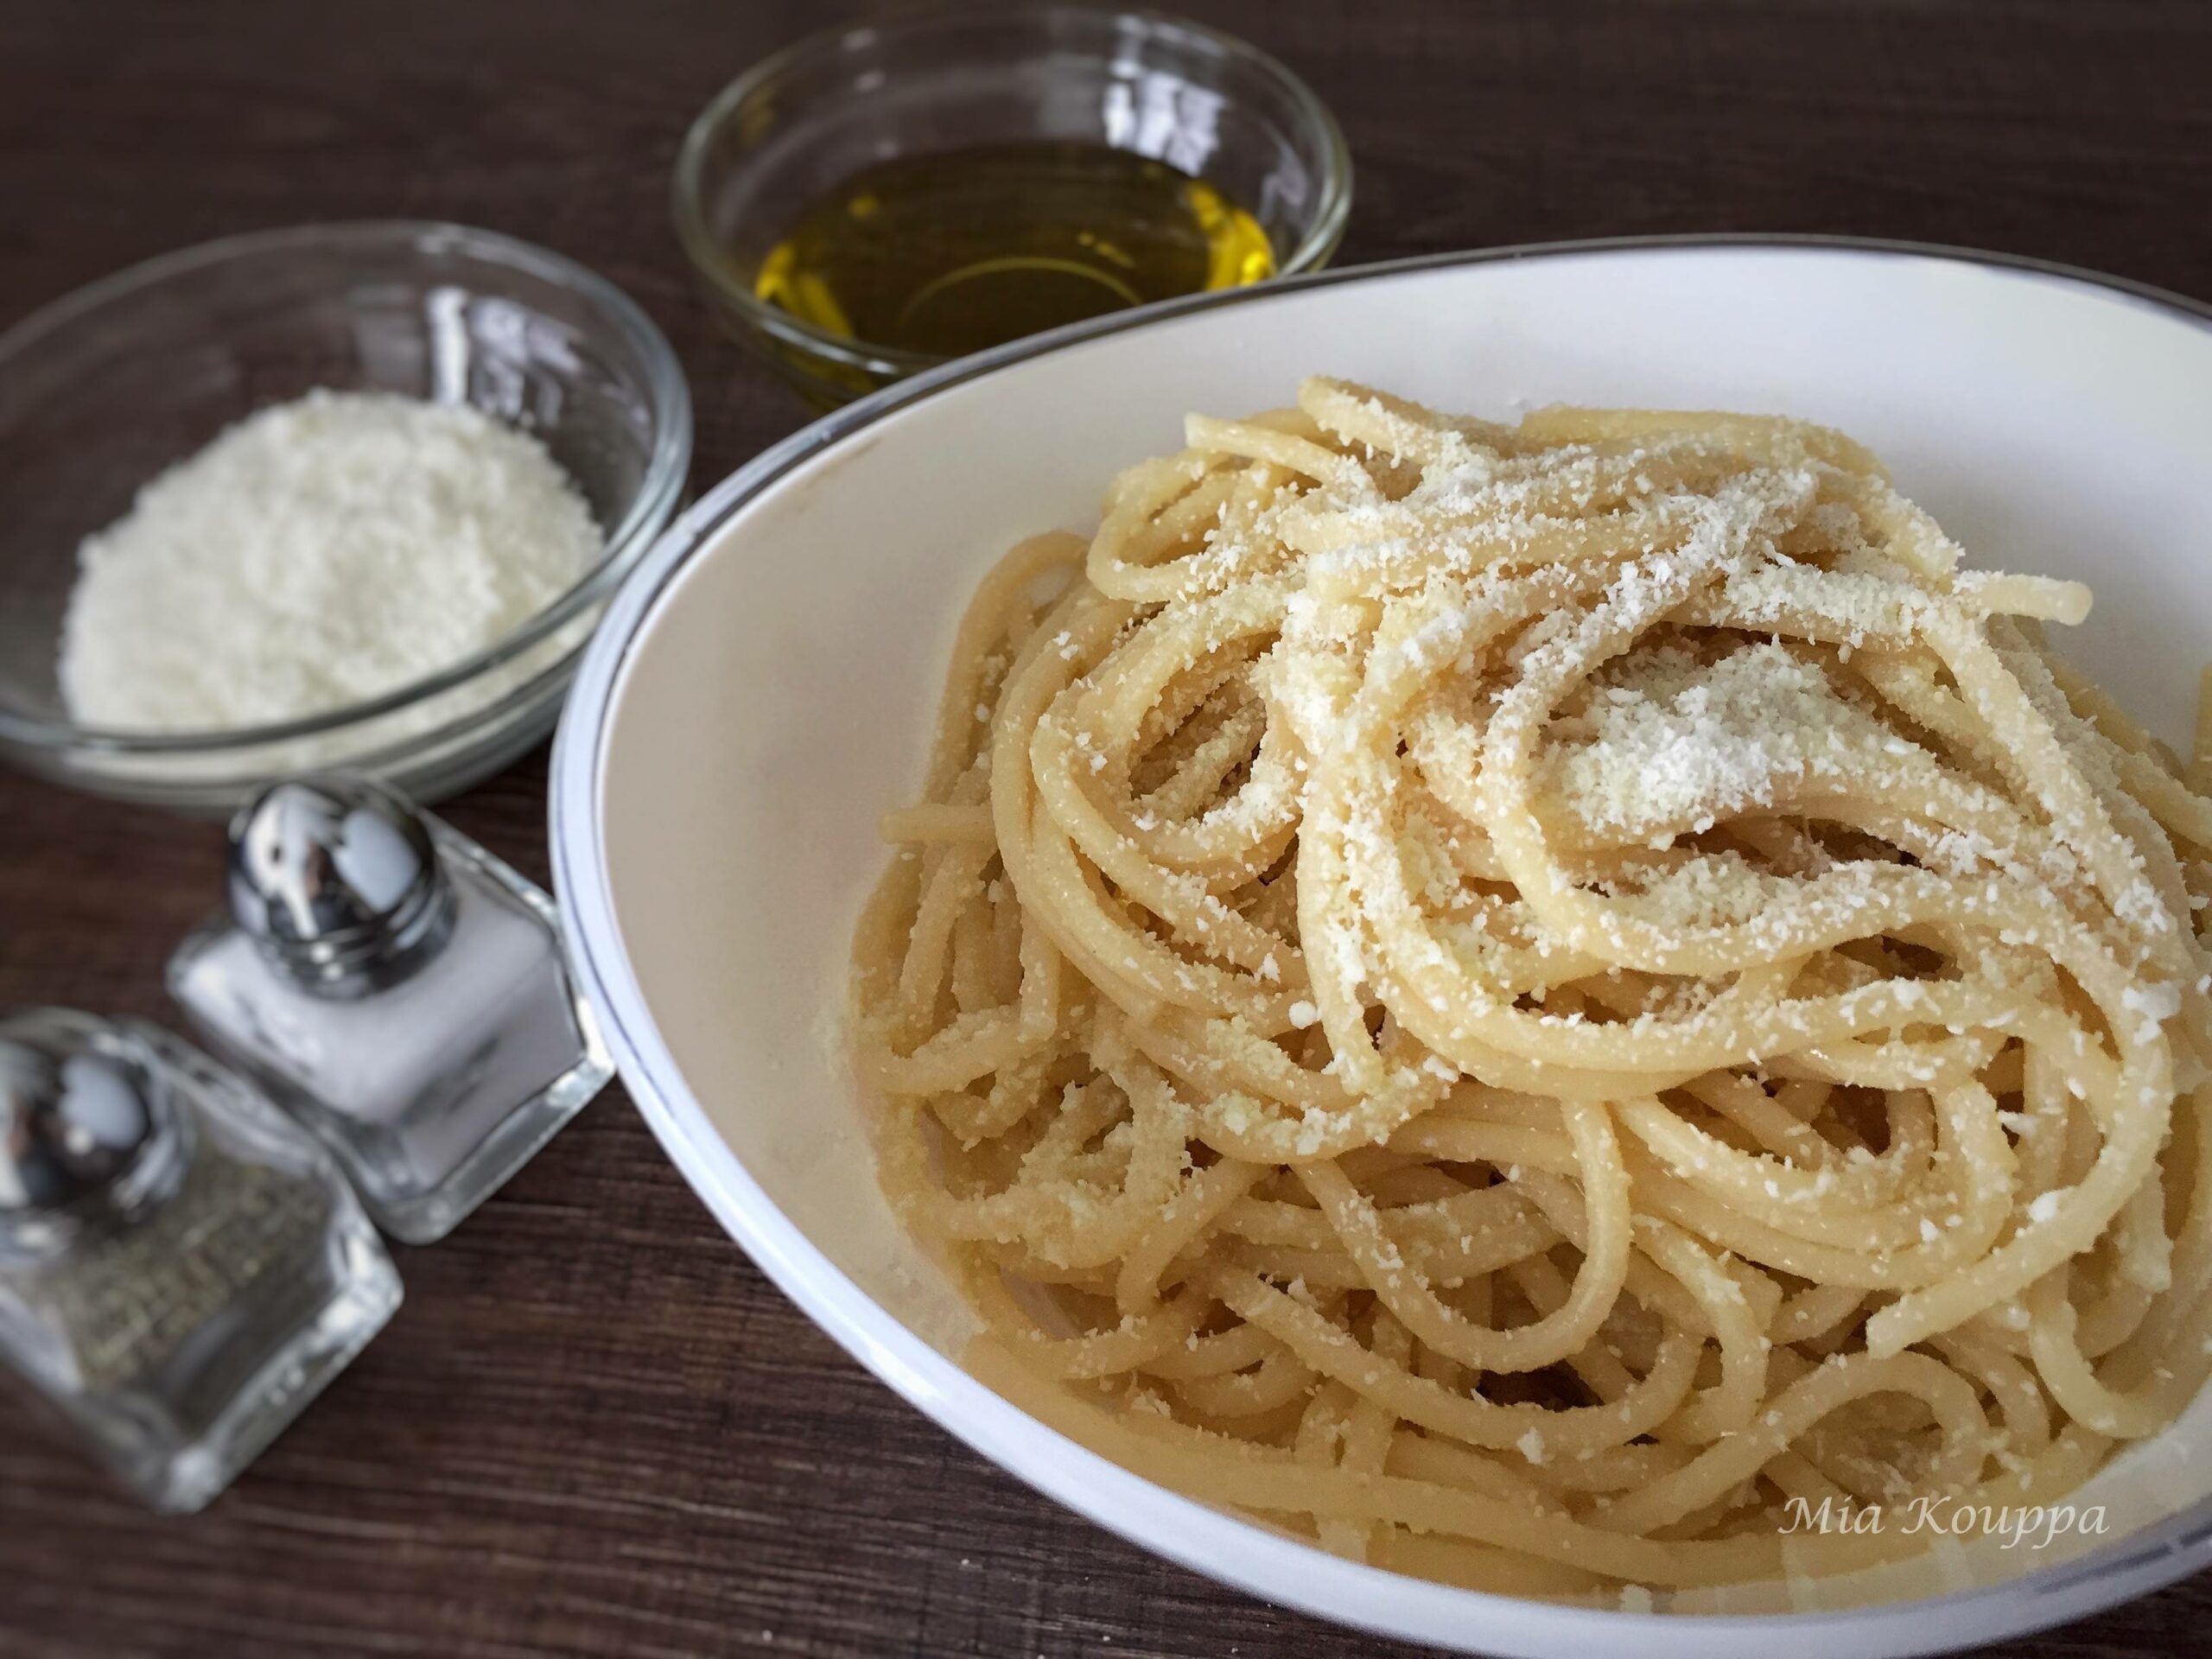 Spaghetti with olive oil and mizithra